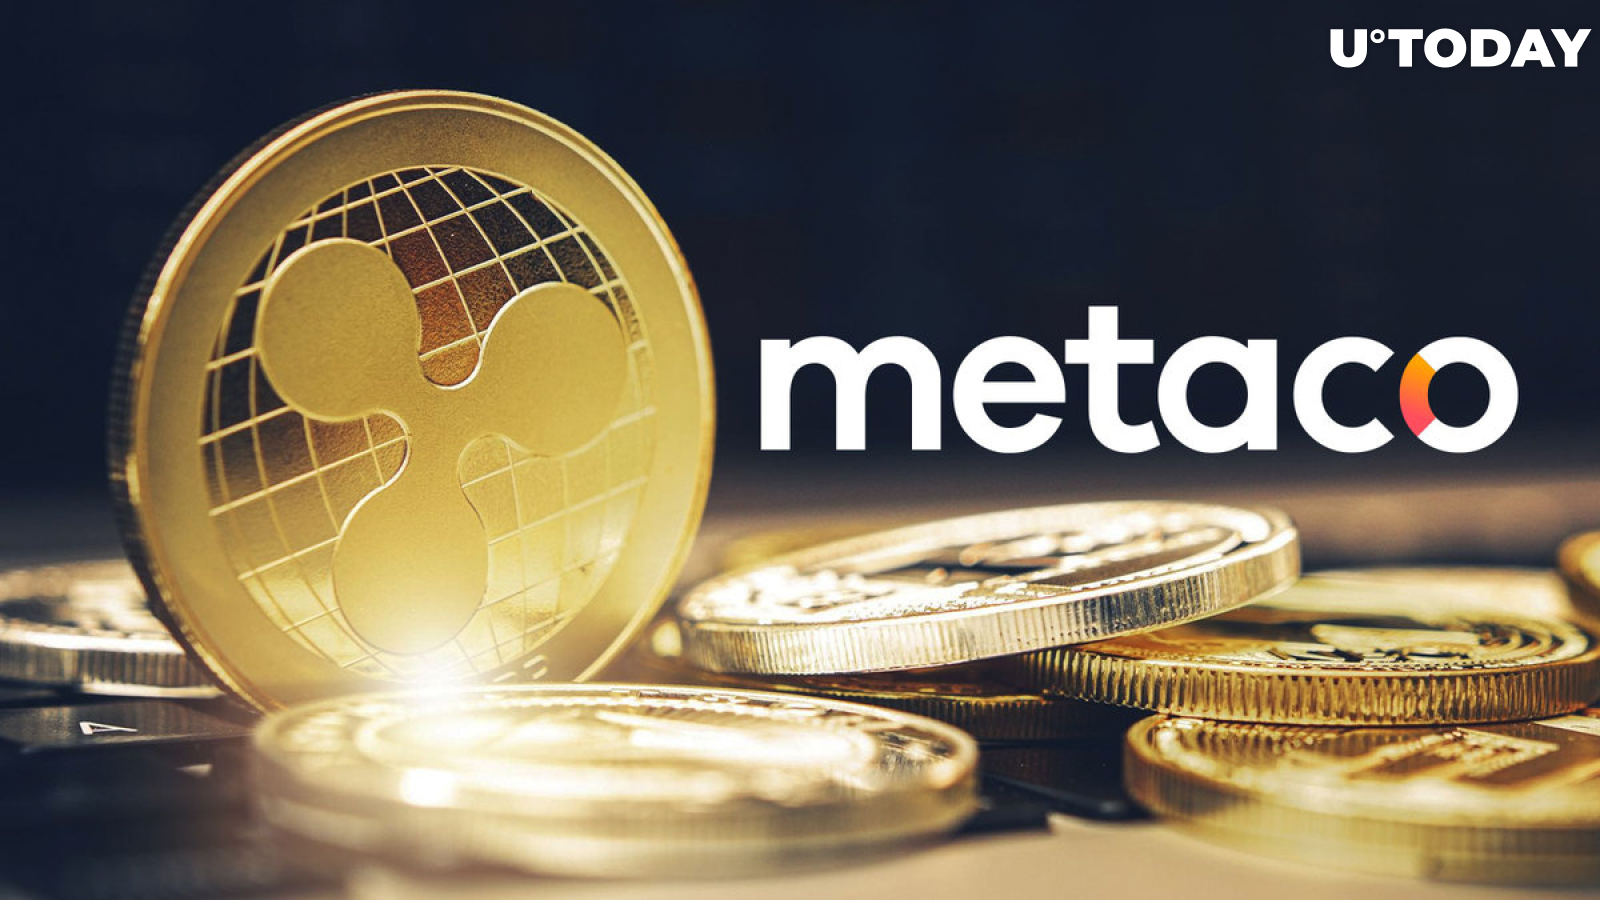 Ripple's Metaco Makes Another Game-Changing TradFi Move